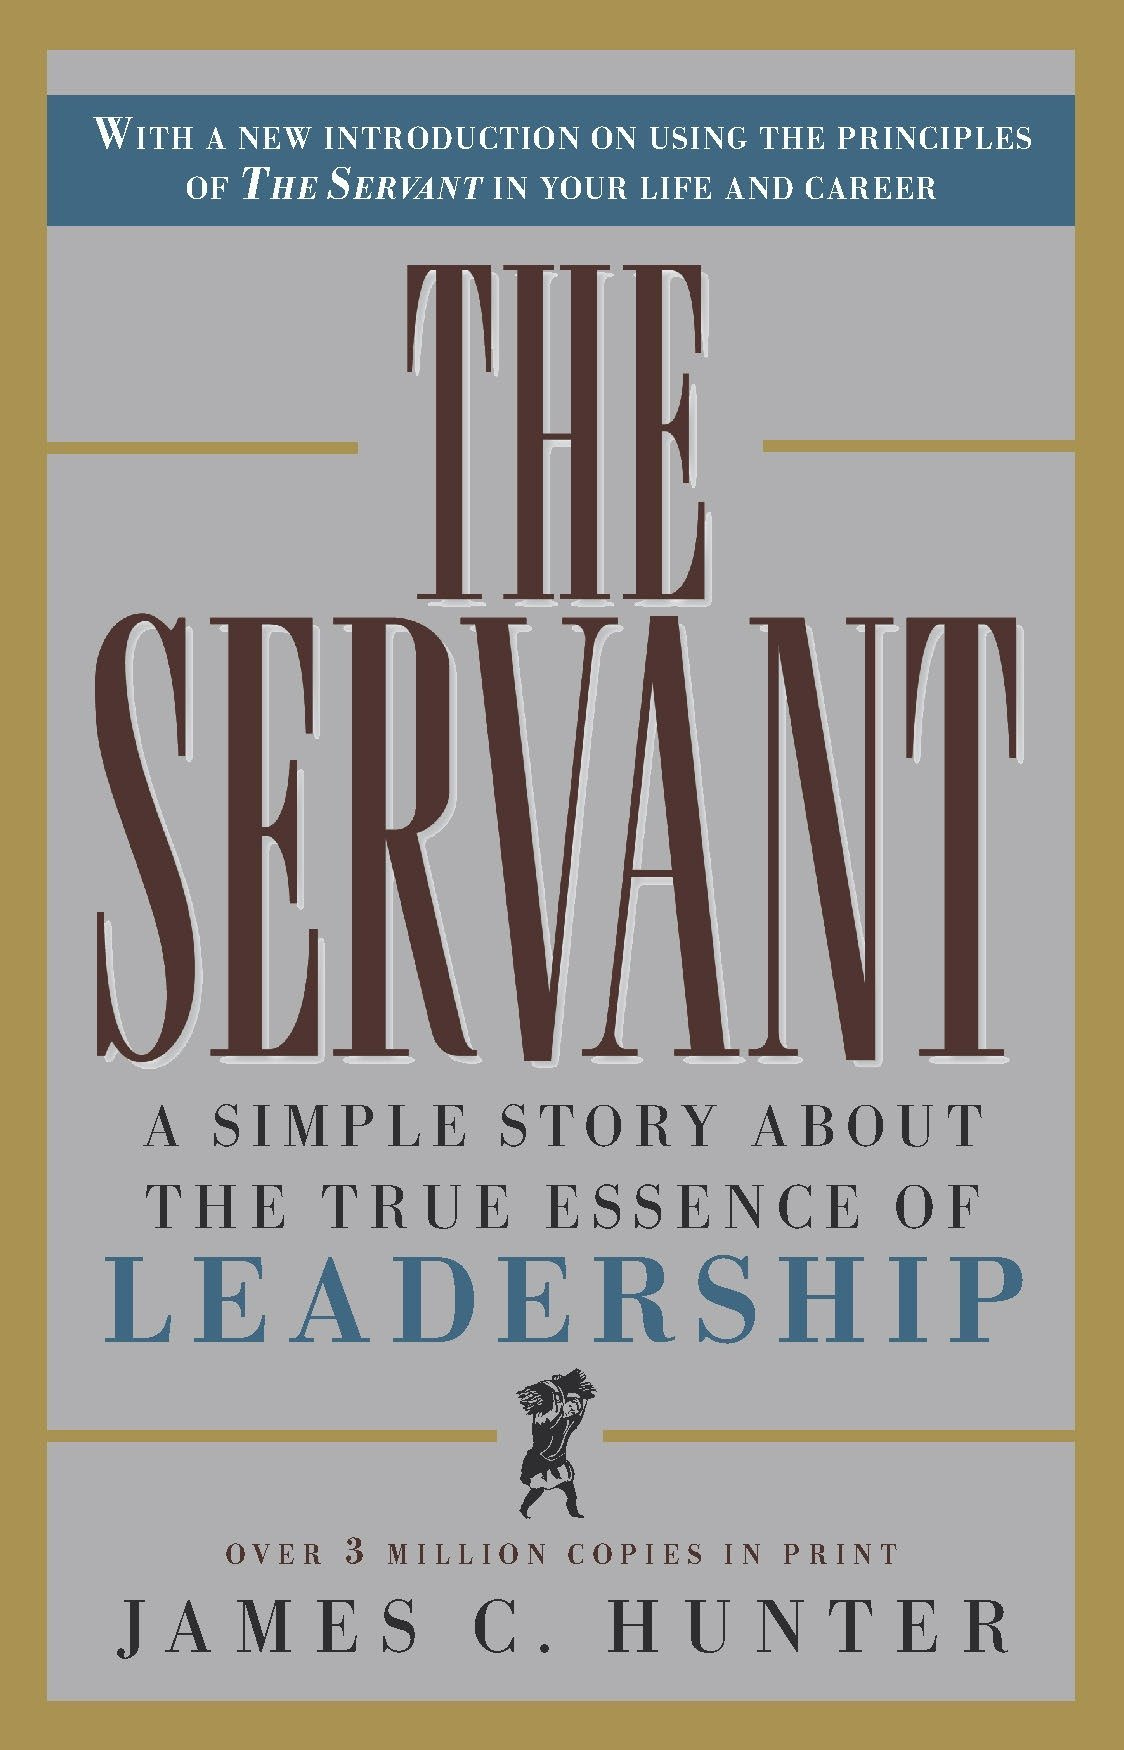 The Servant: A Simple Story About the True Essence of Leadership : Hunter,  James C.: Amazon.com.mx: Libros